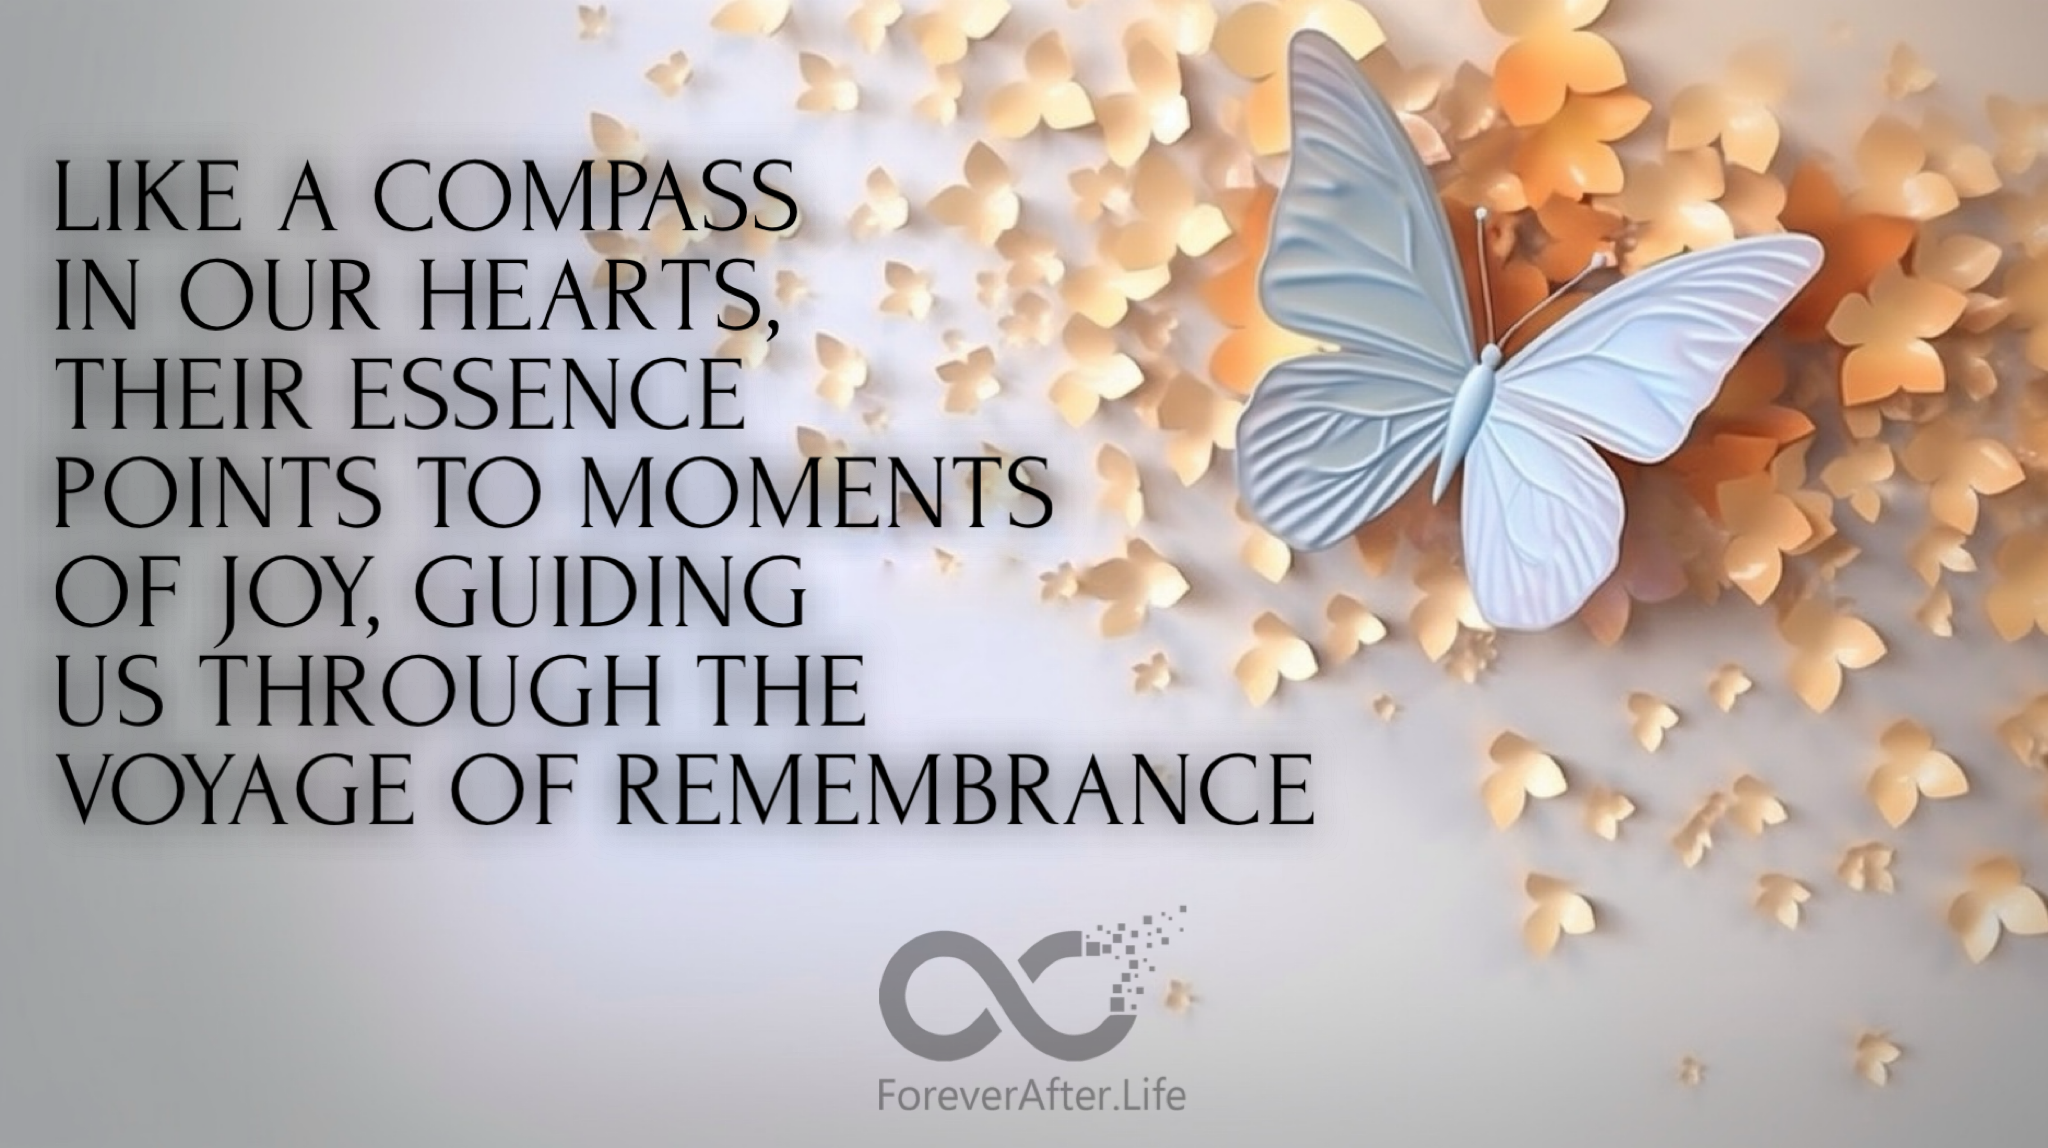 Like a compass in our hearts, their essence points to moments of joy, guiding us through the voyage of remembrance.